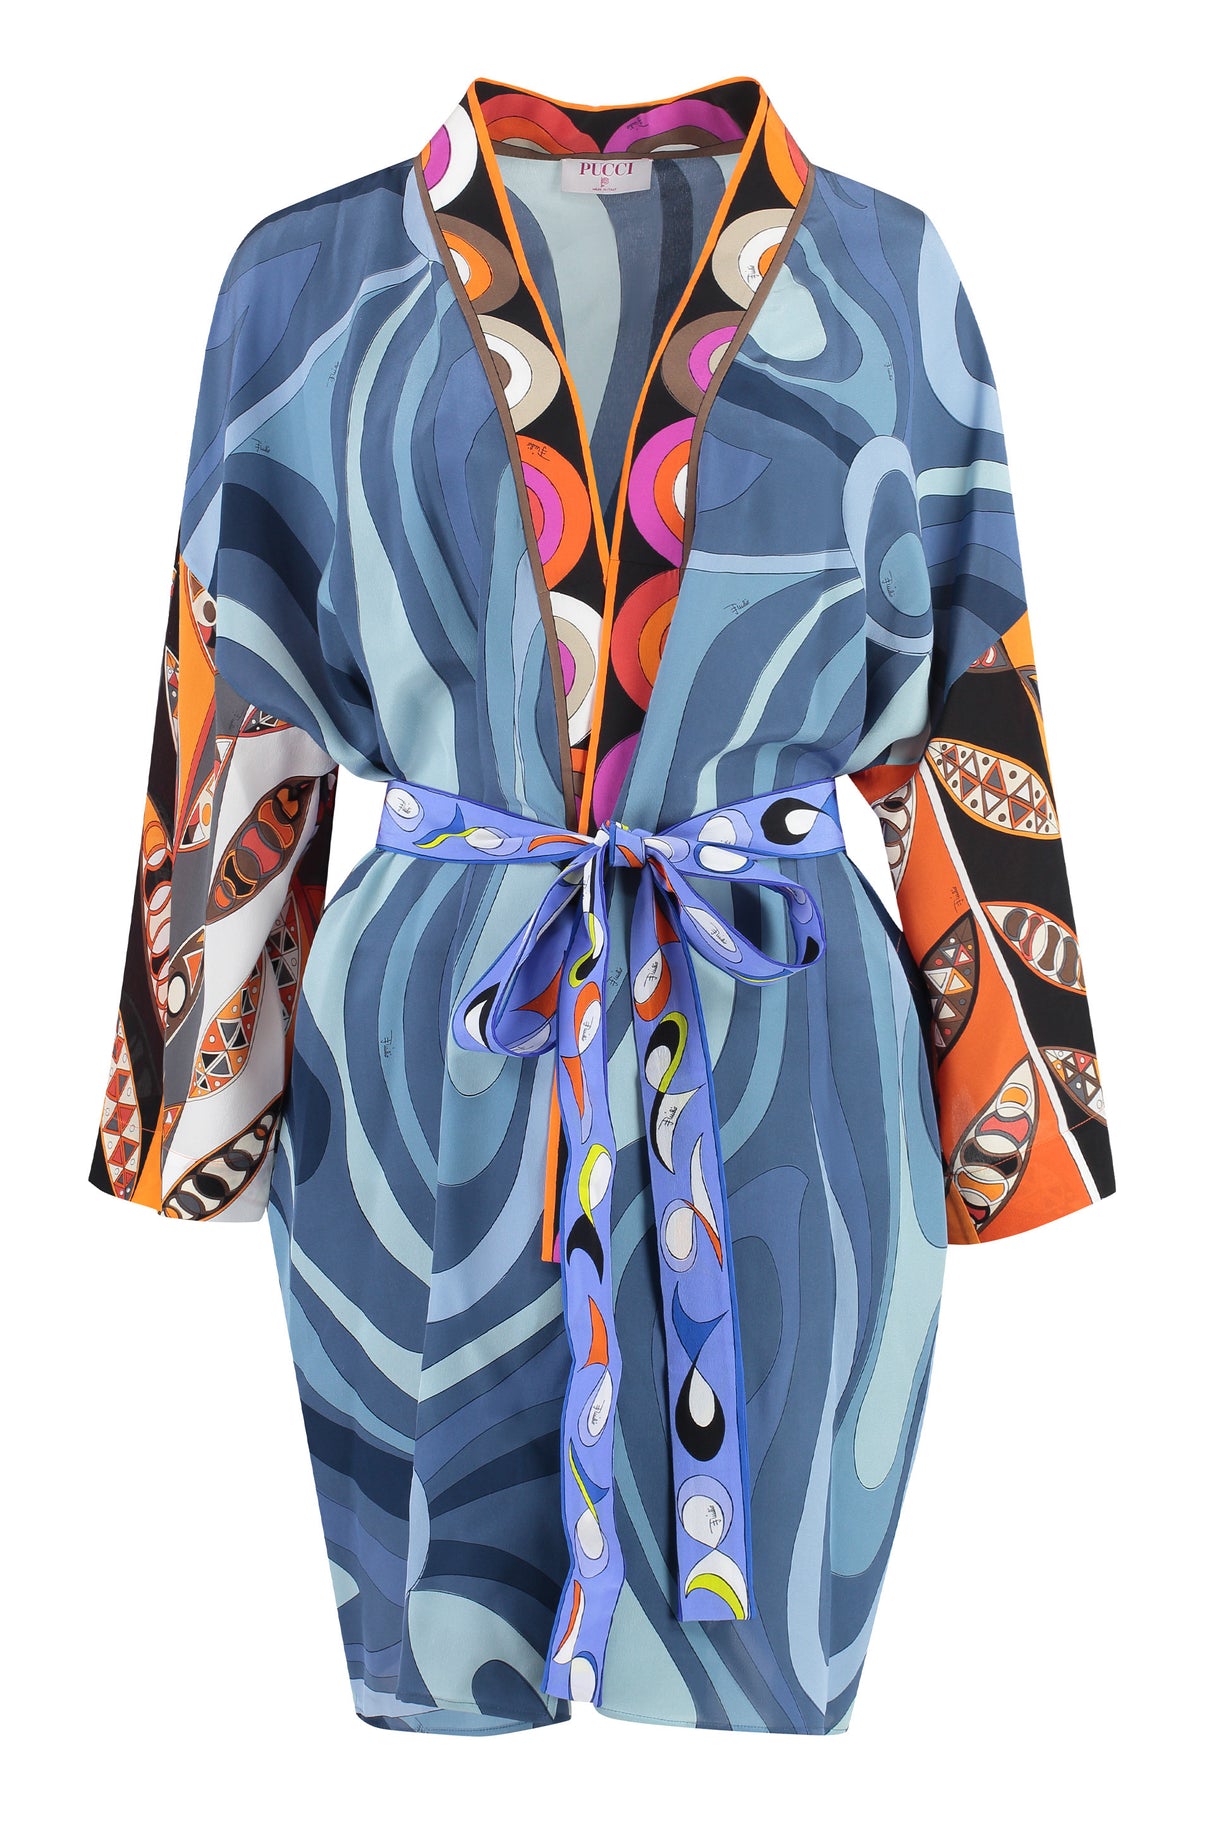 EMILIO PUCCI Luxurious Printed Silk Night Gown for Women - FW23 Collection